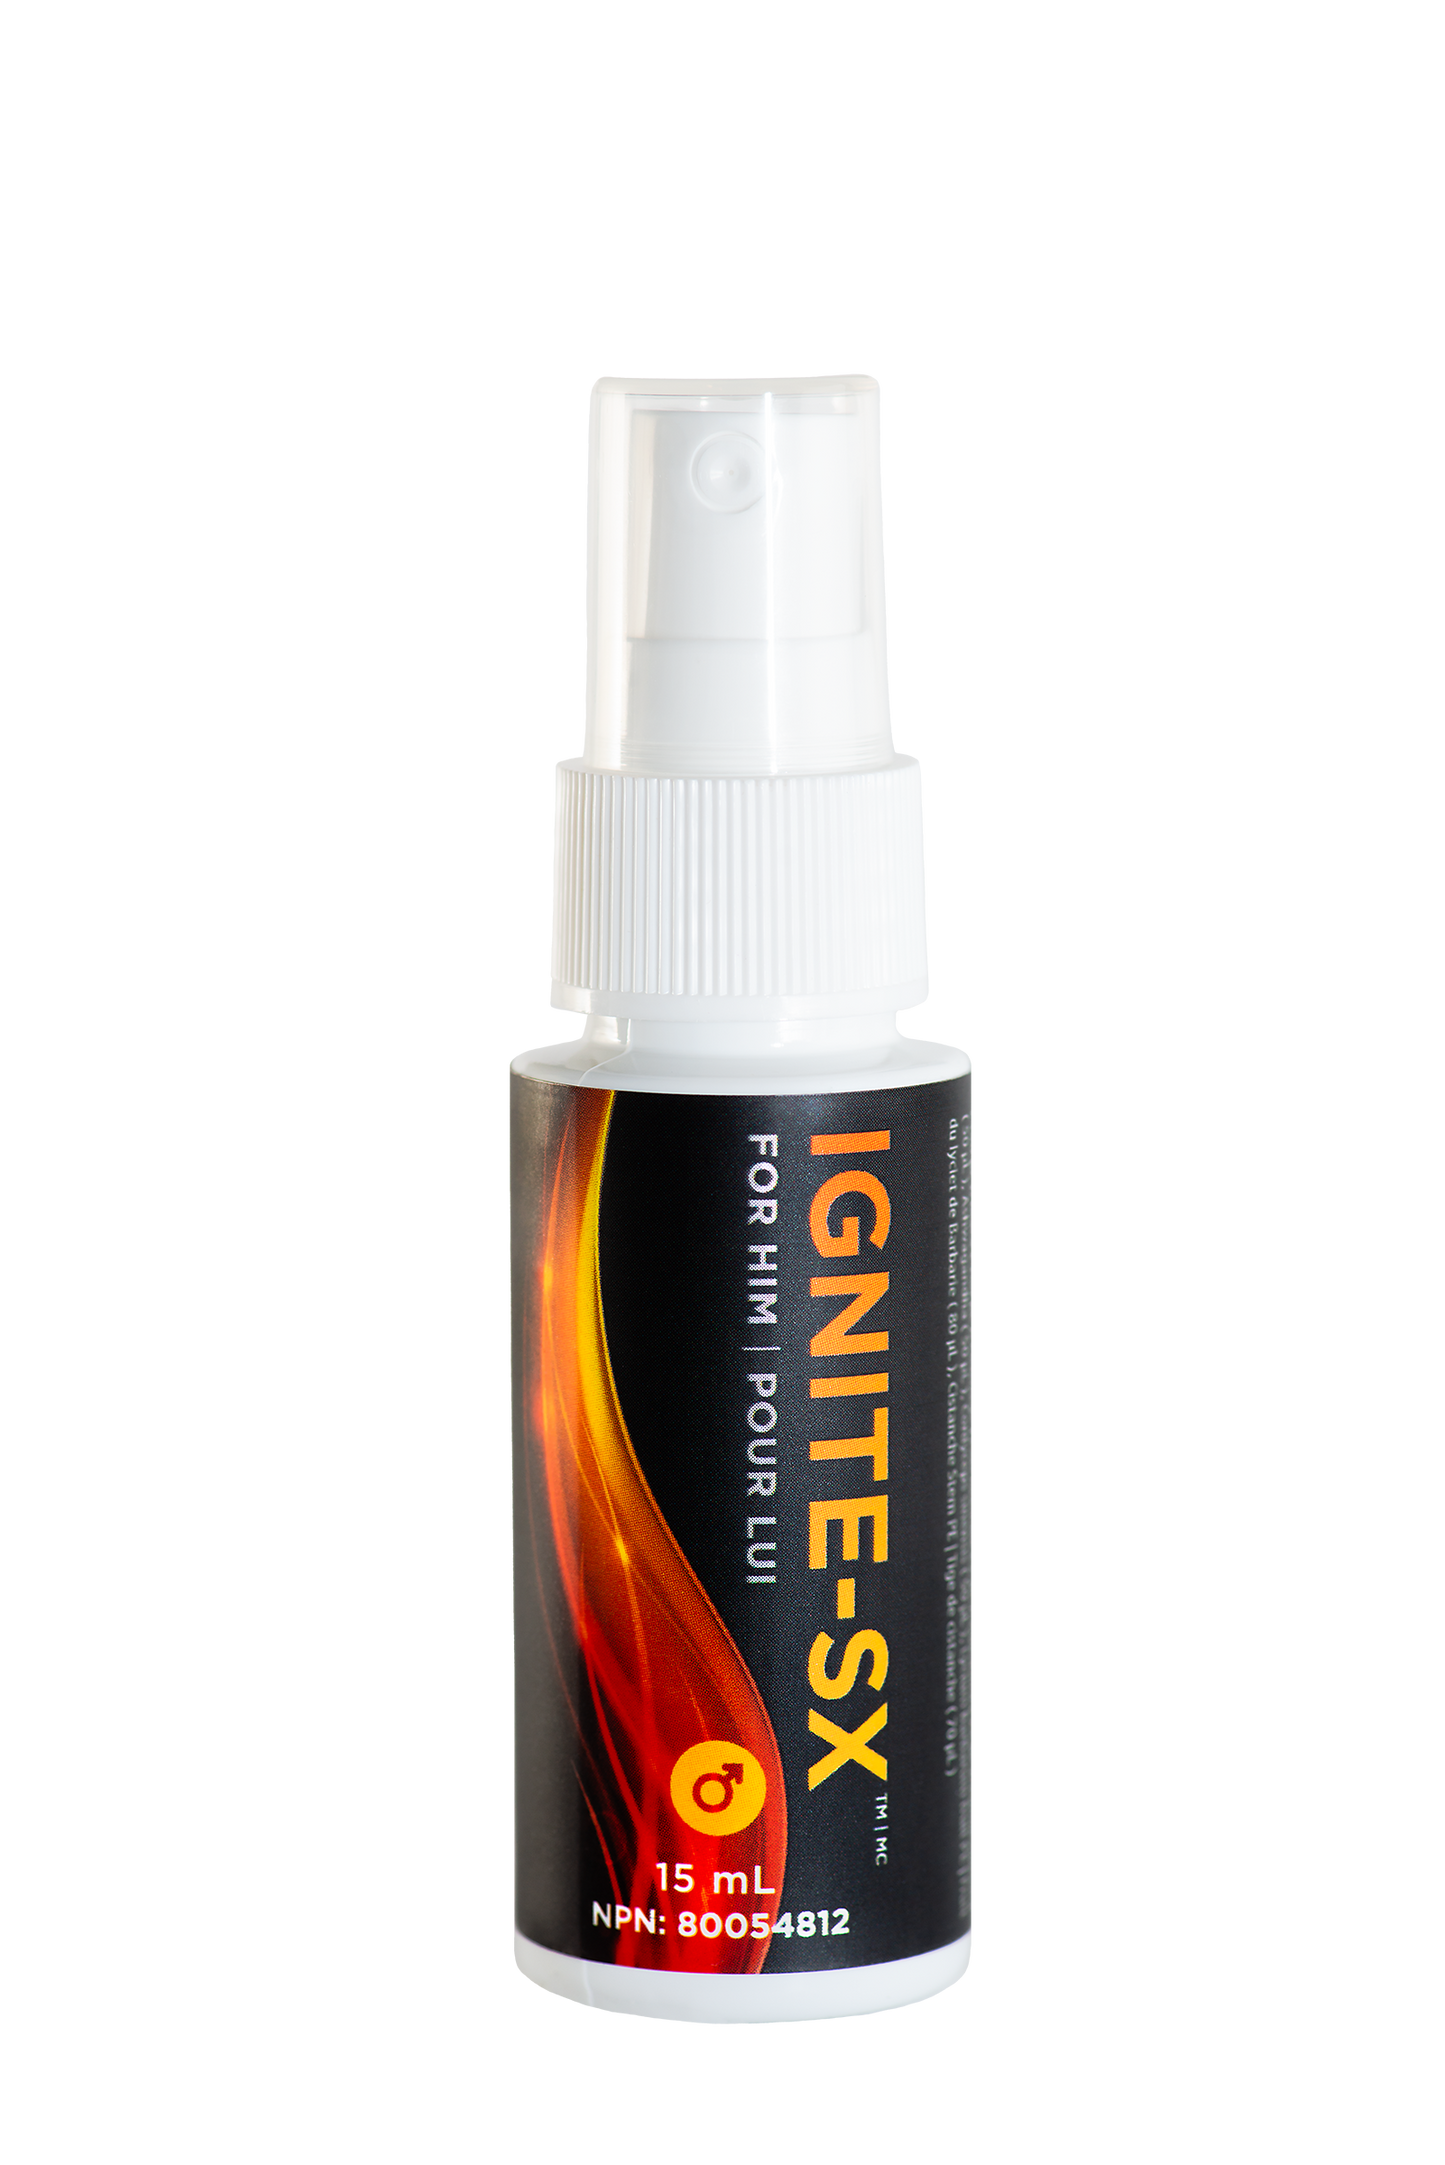 IGNITE-SX FOR HIM - Fast Acting Spray